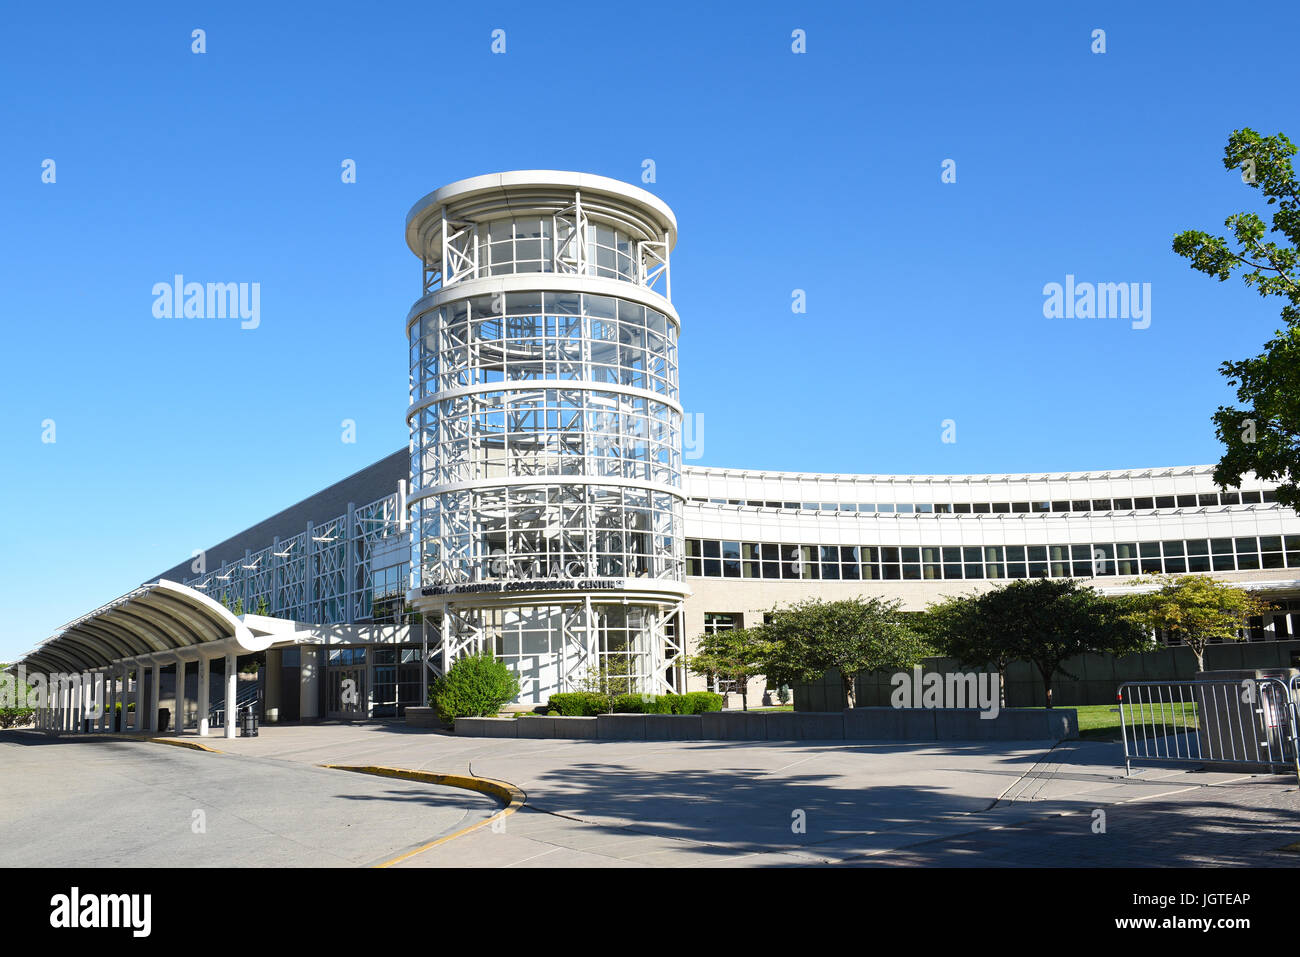 SALT LAKE CITY, UTAH - JUNE 29, 2017: The Calvin L. Rampton Salt Palace Convention Center. Named after Utahs 11th governor, it is commonly called the  Stock Photo